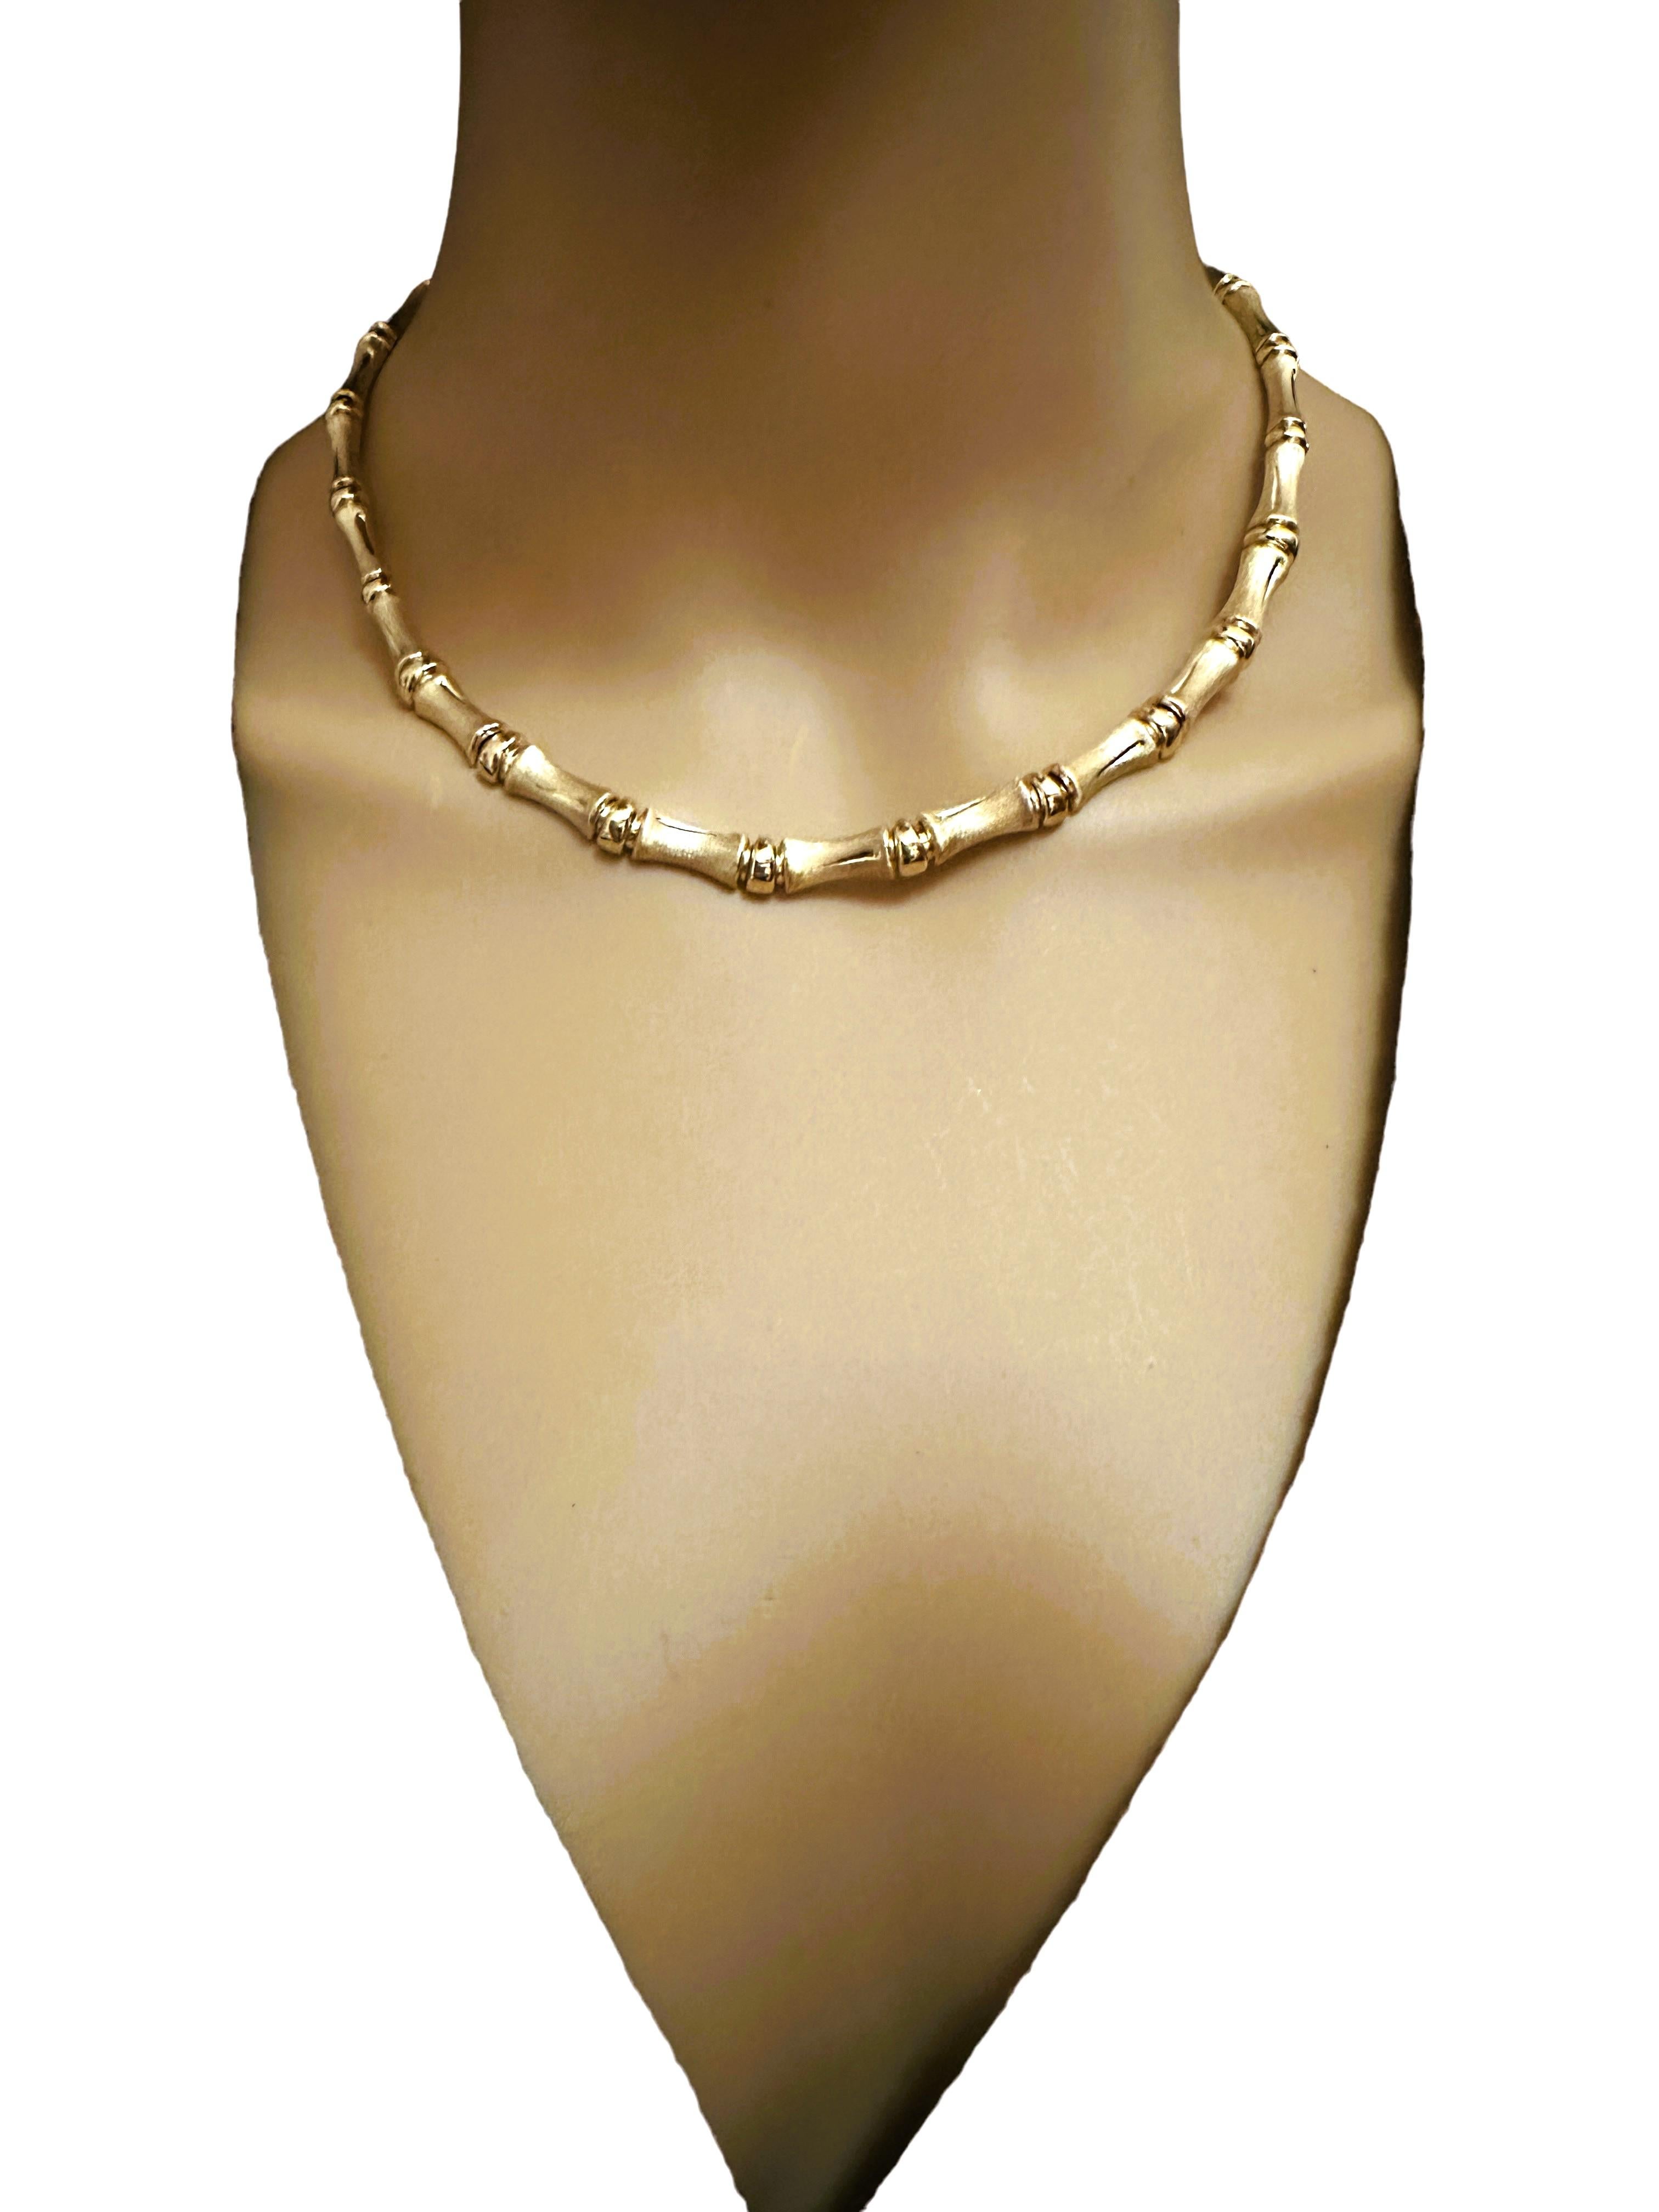 This necklace is just gorgeous.  I love the design.  It is such a quality made piece.  It is 17 inches long and  fluctuates between 7 and 5 mm.  It has a hidden slide-in closure with a safety clasp.  It is stamped 